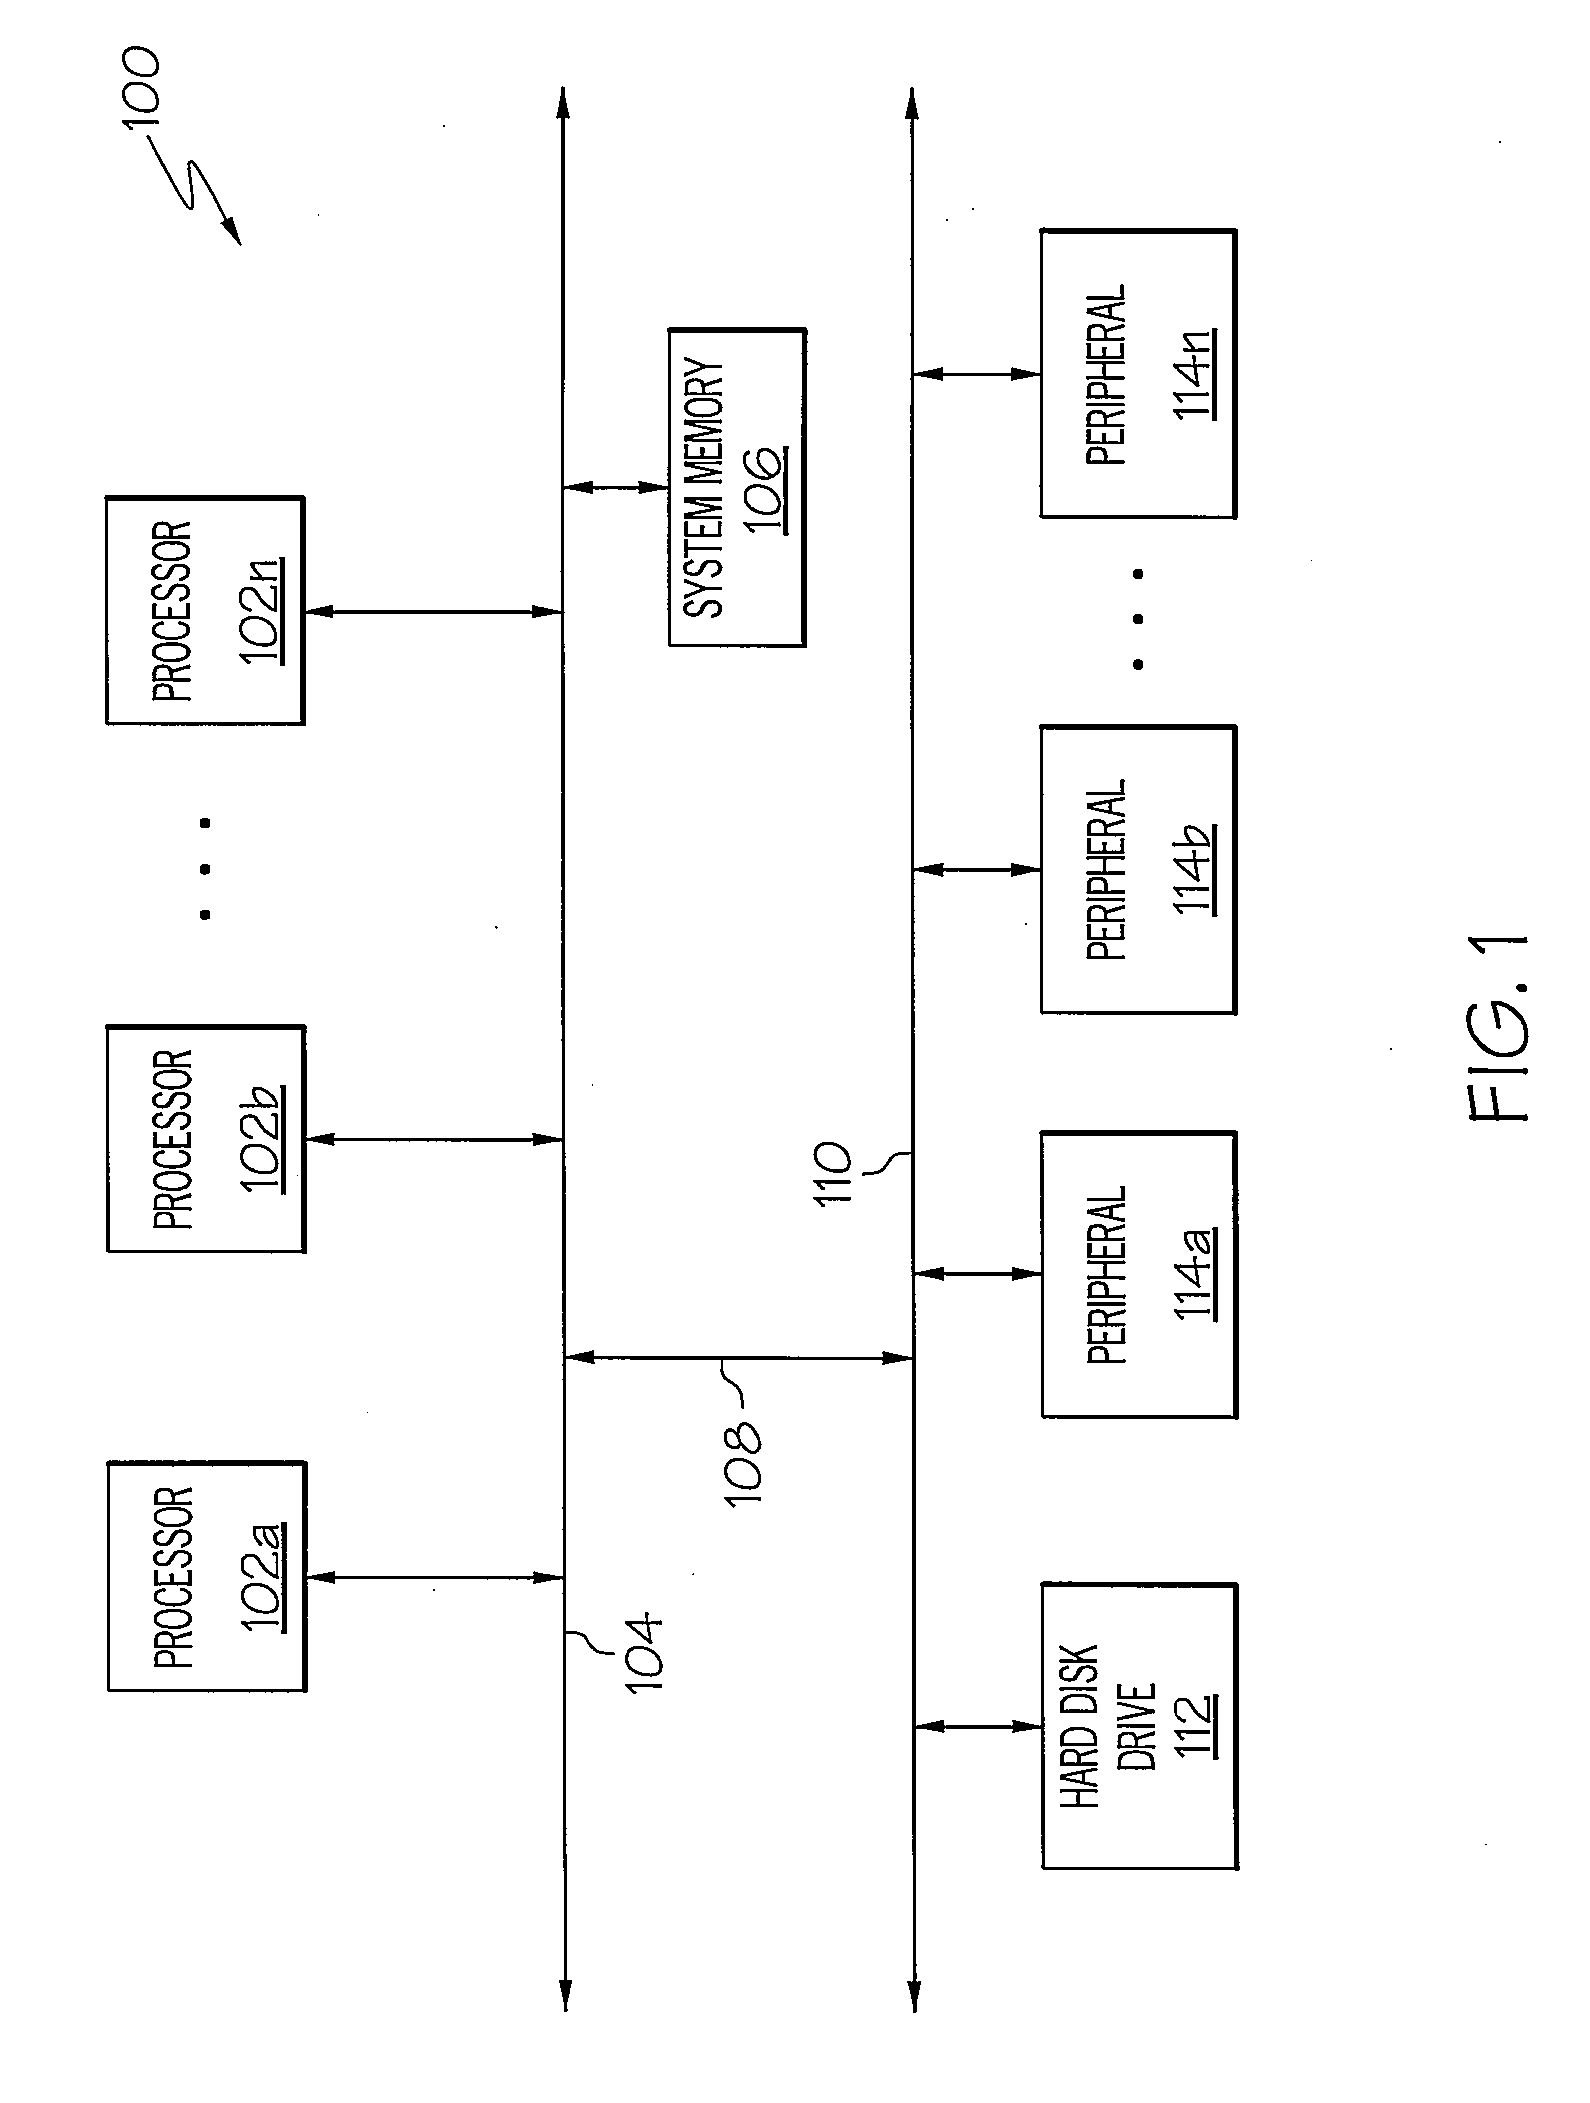 System and Method for Implementing Adaptive Window and Dialog Management